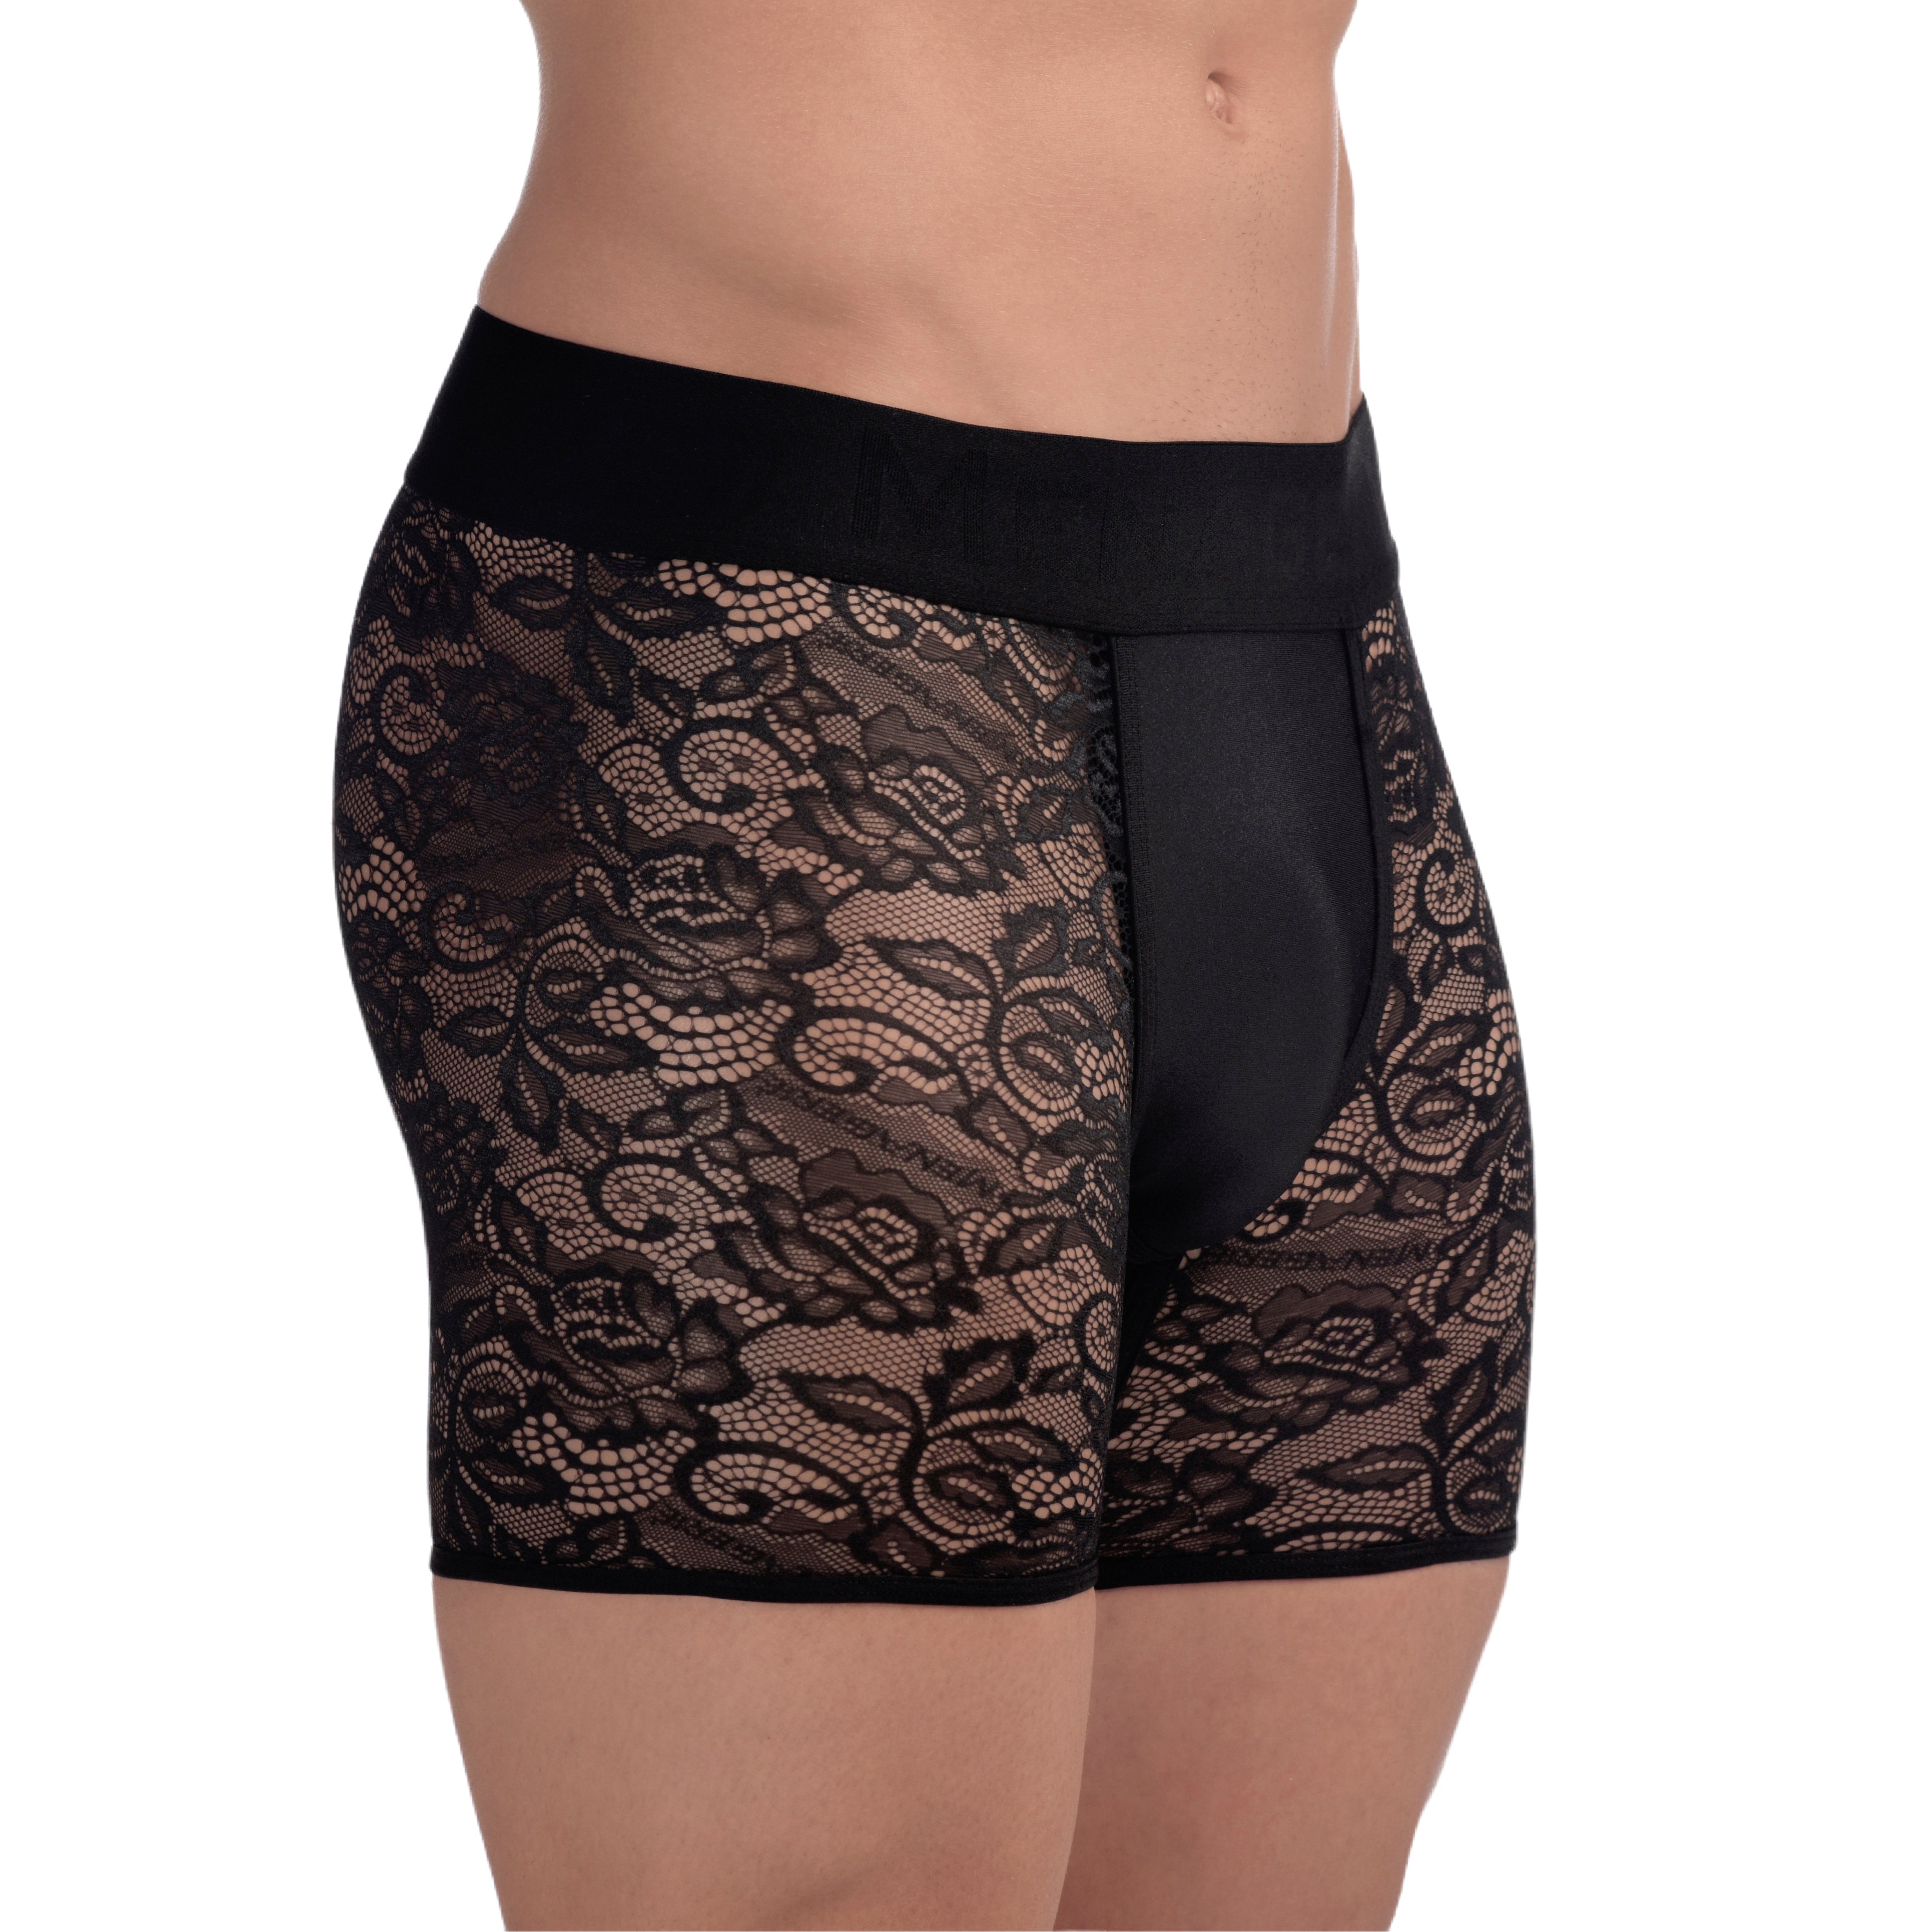 Lace Boxers For Women